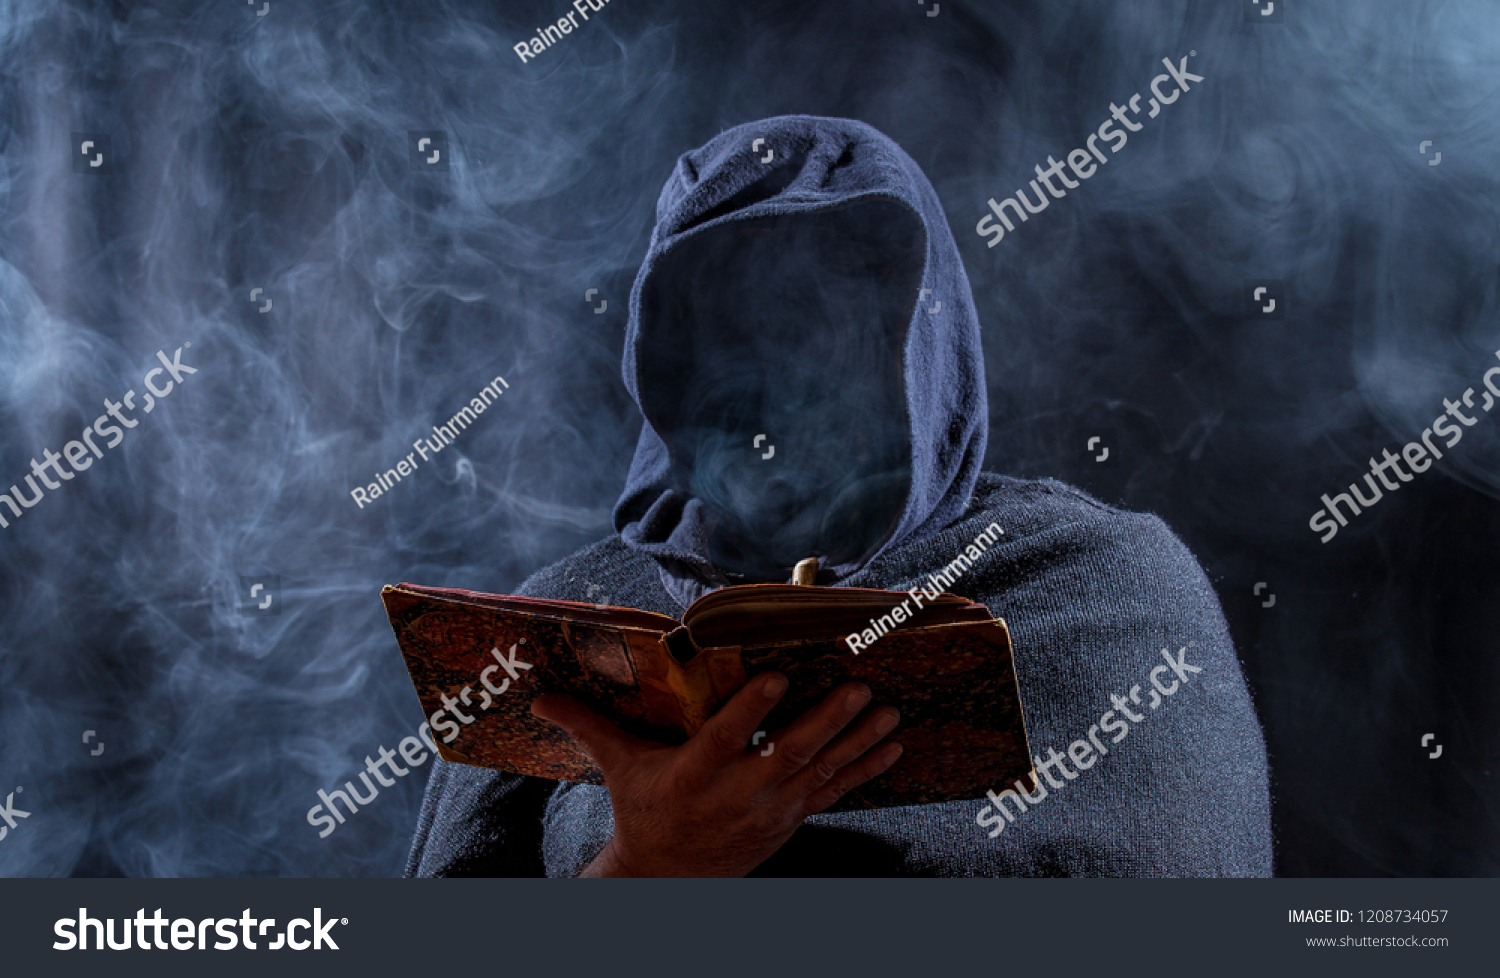 a man hides his face and reads in a book #1208734057